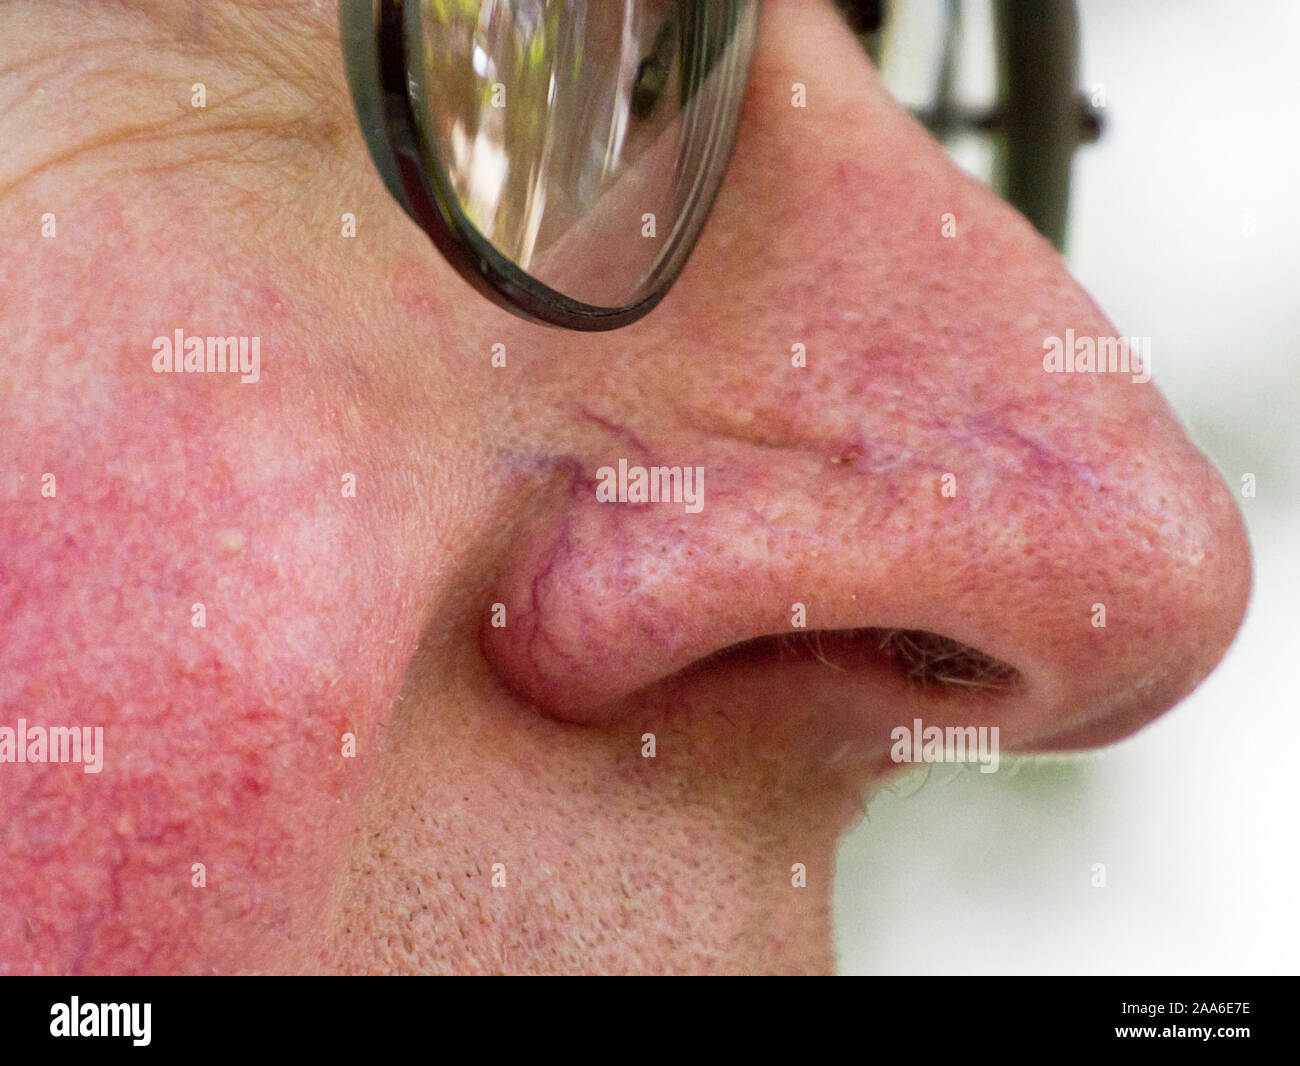 A close-up of an older white man's face with broken capillaries and veins in the skin on his nose and cheeks and enlarged pores Stock Photo